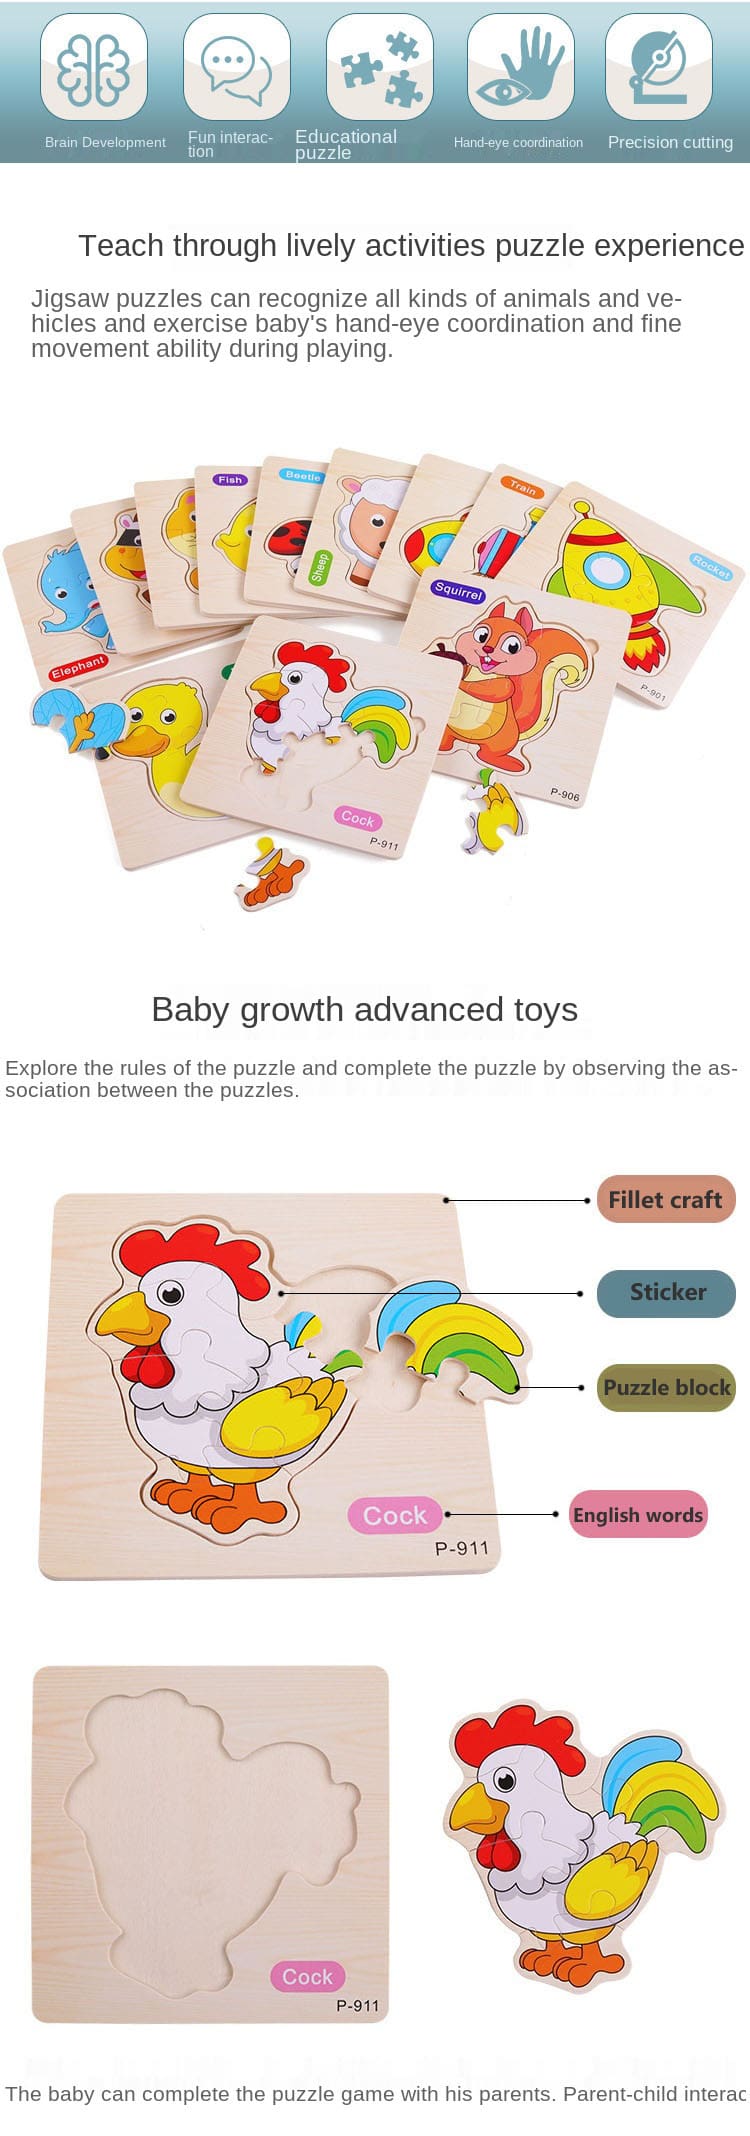 3D Wooden Jigsaw Puzzle Educational Toy for Kids